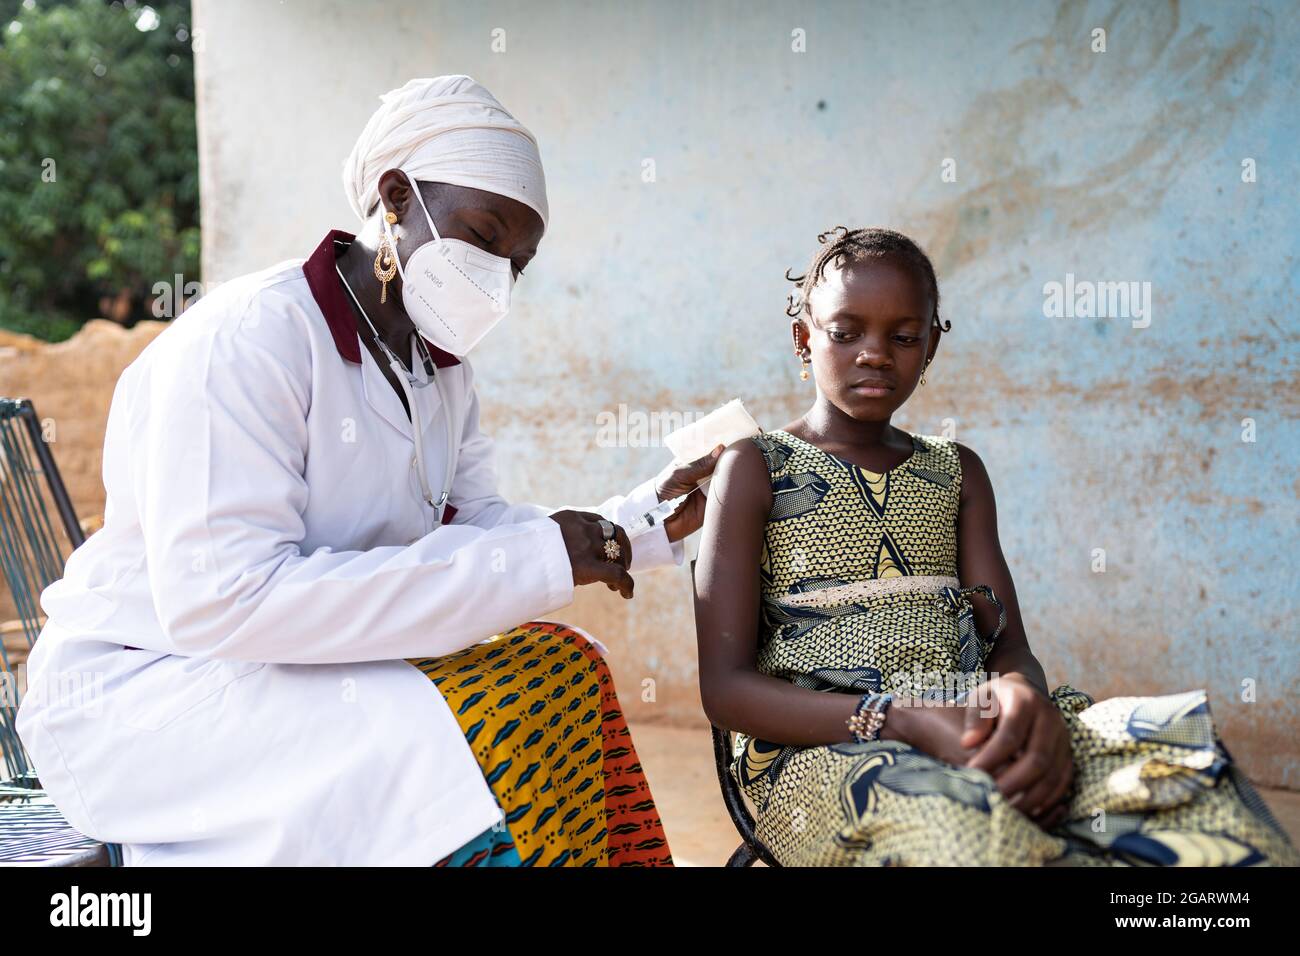 In this image, a gentle black nurse with protective face mask is delicately injecting a vaccine into the arm of a relaxed little African schoolgirl du Stock Photo